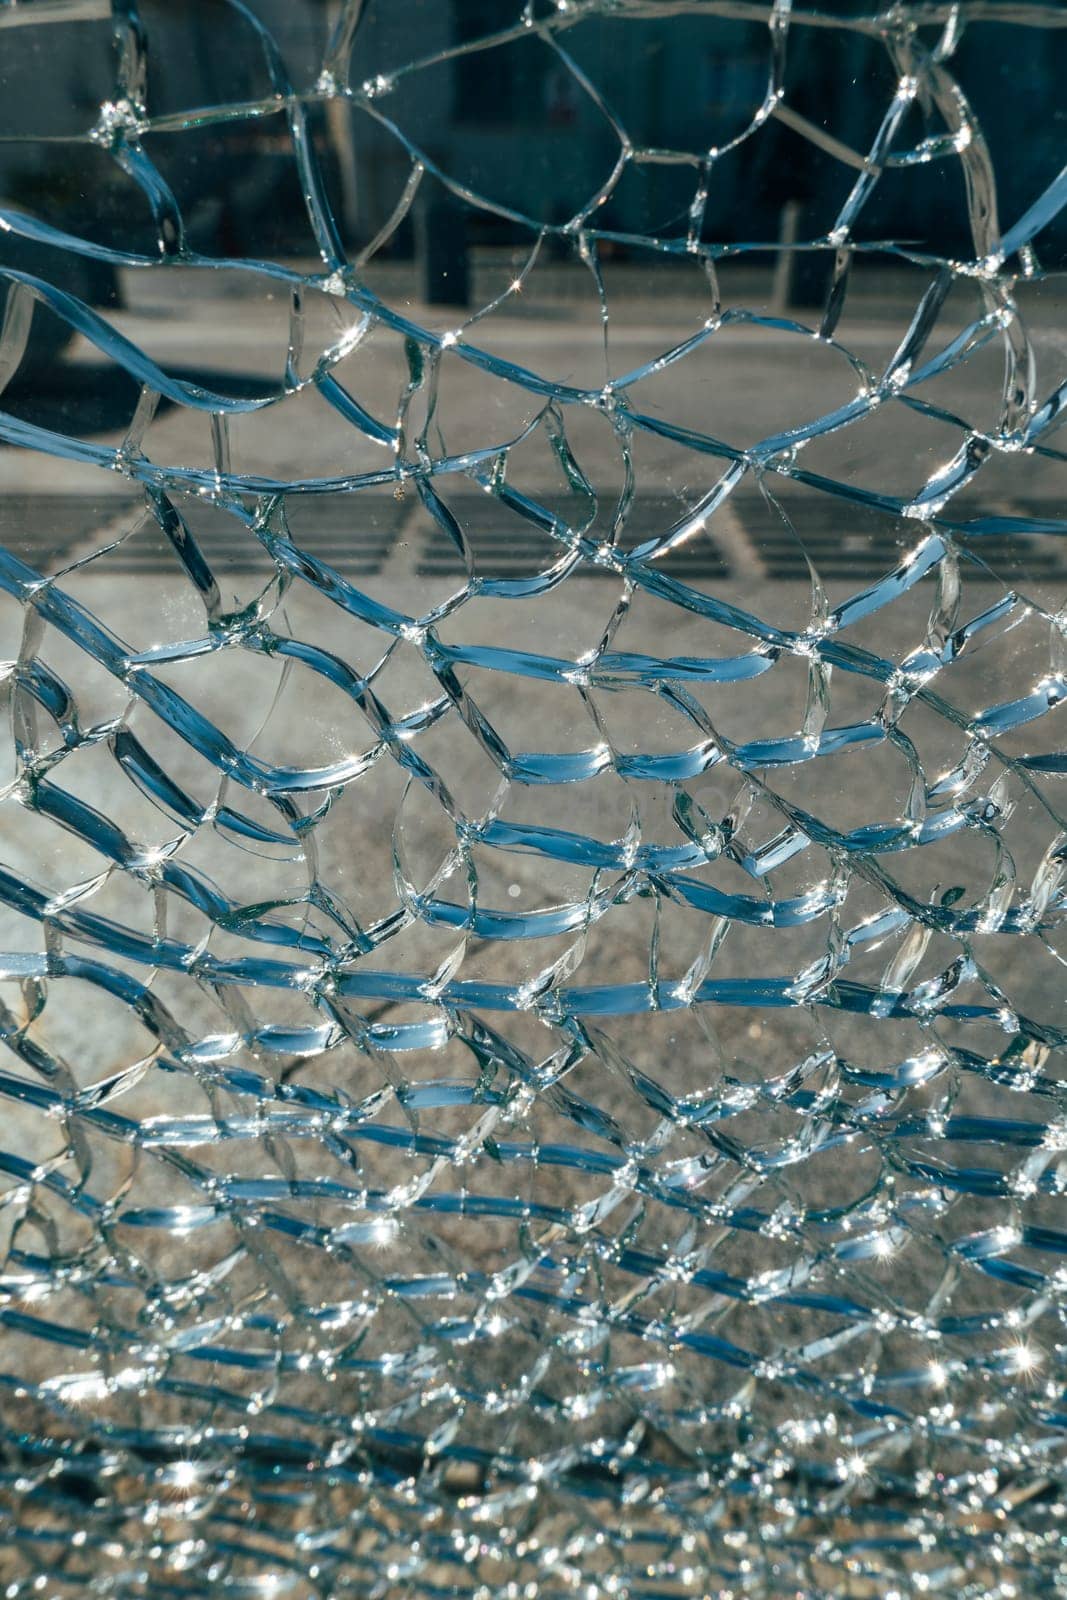 Shattered Glass Background with Net Pattern and Close-up Details by apavlin